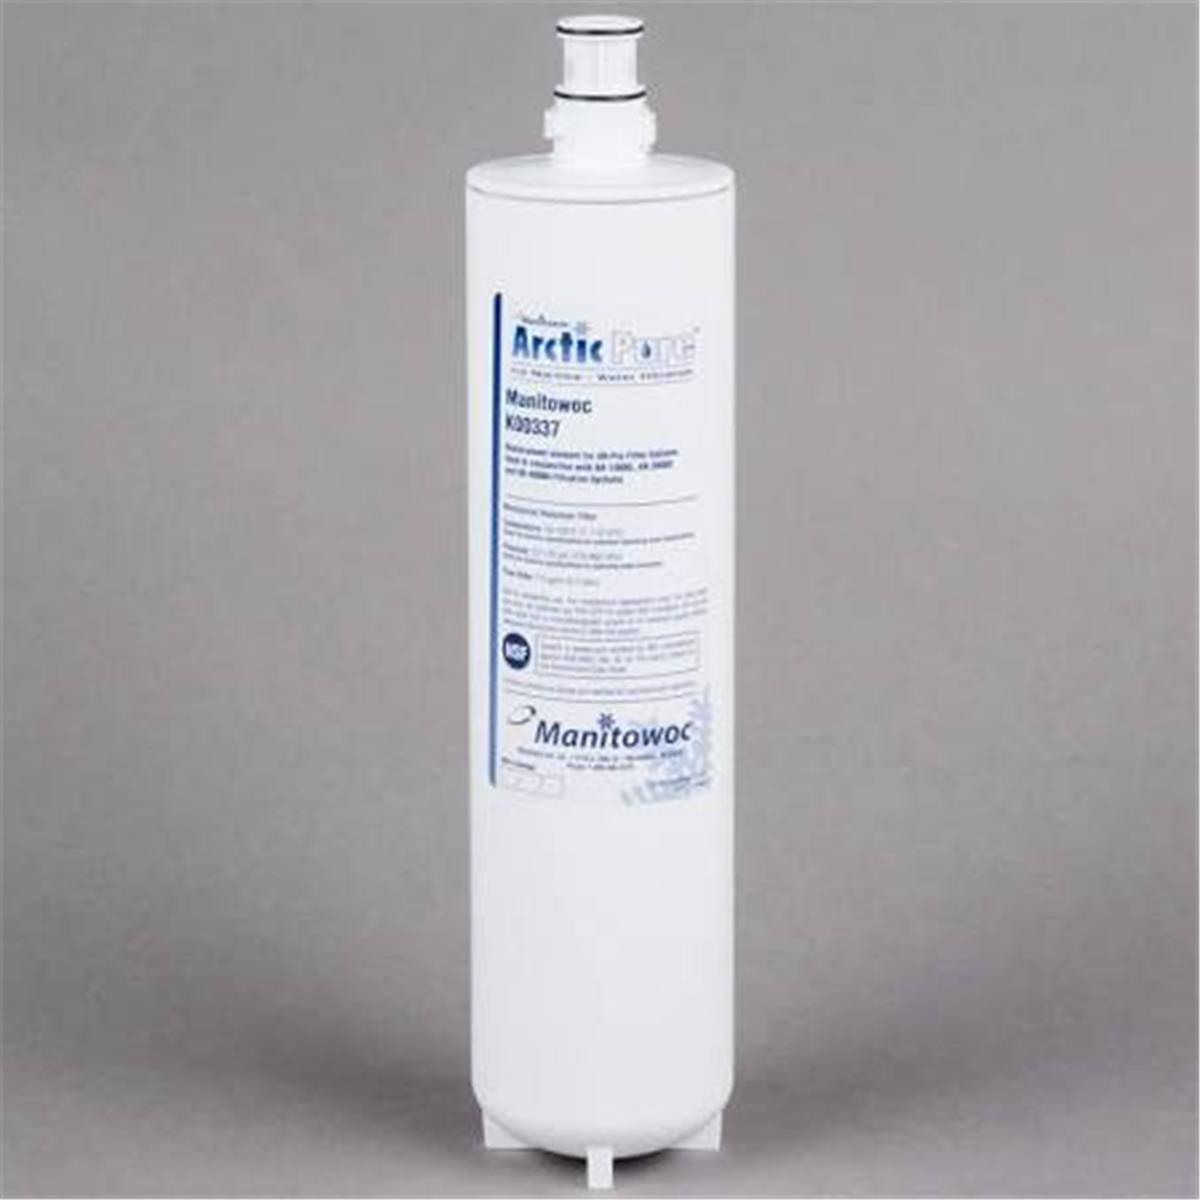 Picture of Manitowoc MANITOWOC-K00337 5 GPM Arctic Pure Replacement Ice Maker Pre-Filter Cartridge